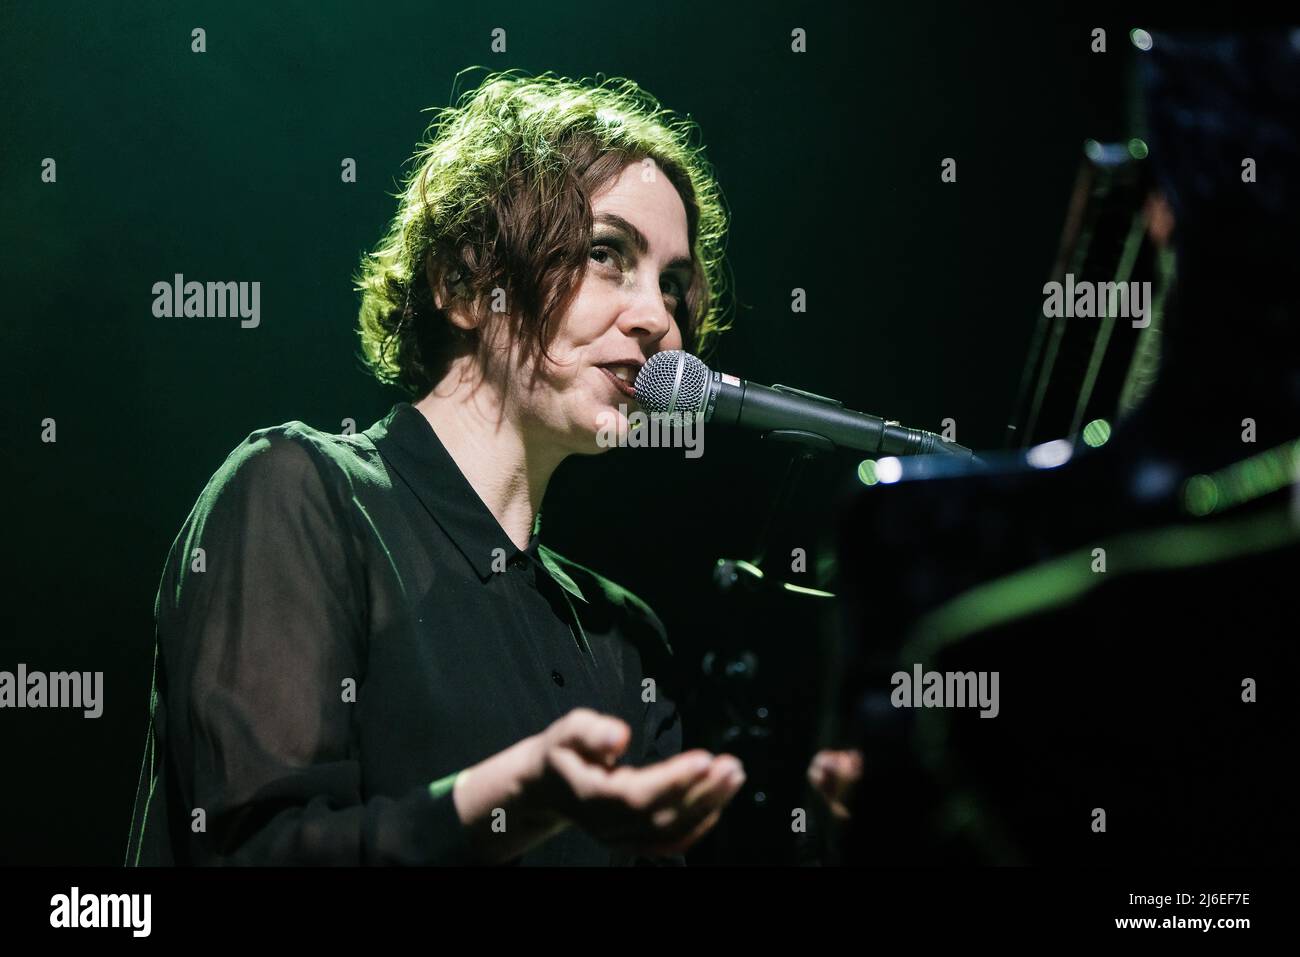 Tilburg, Netherlands. 23rd, April 2022. The American singer, musician and composer Emma Ruth Rundle performs a live concert during the Dutch music festival Roadburn Festival 2022 in Tilburg. (Photo credit: Gonzales Photo - Peter Troest). Stock Photo